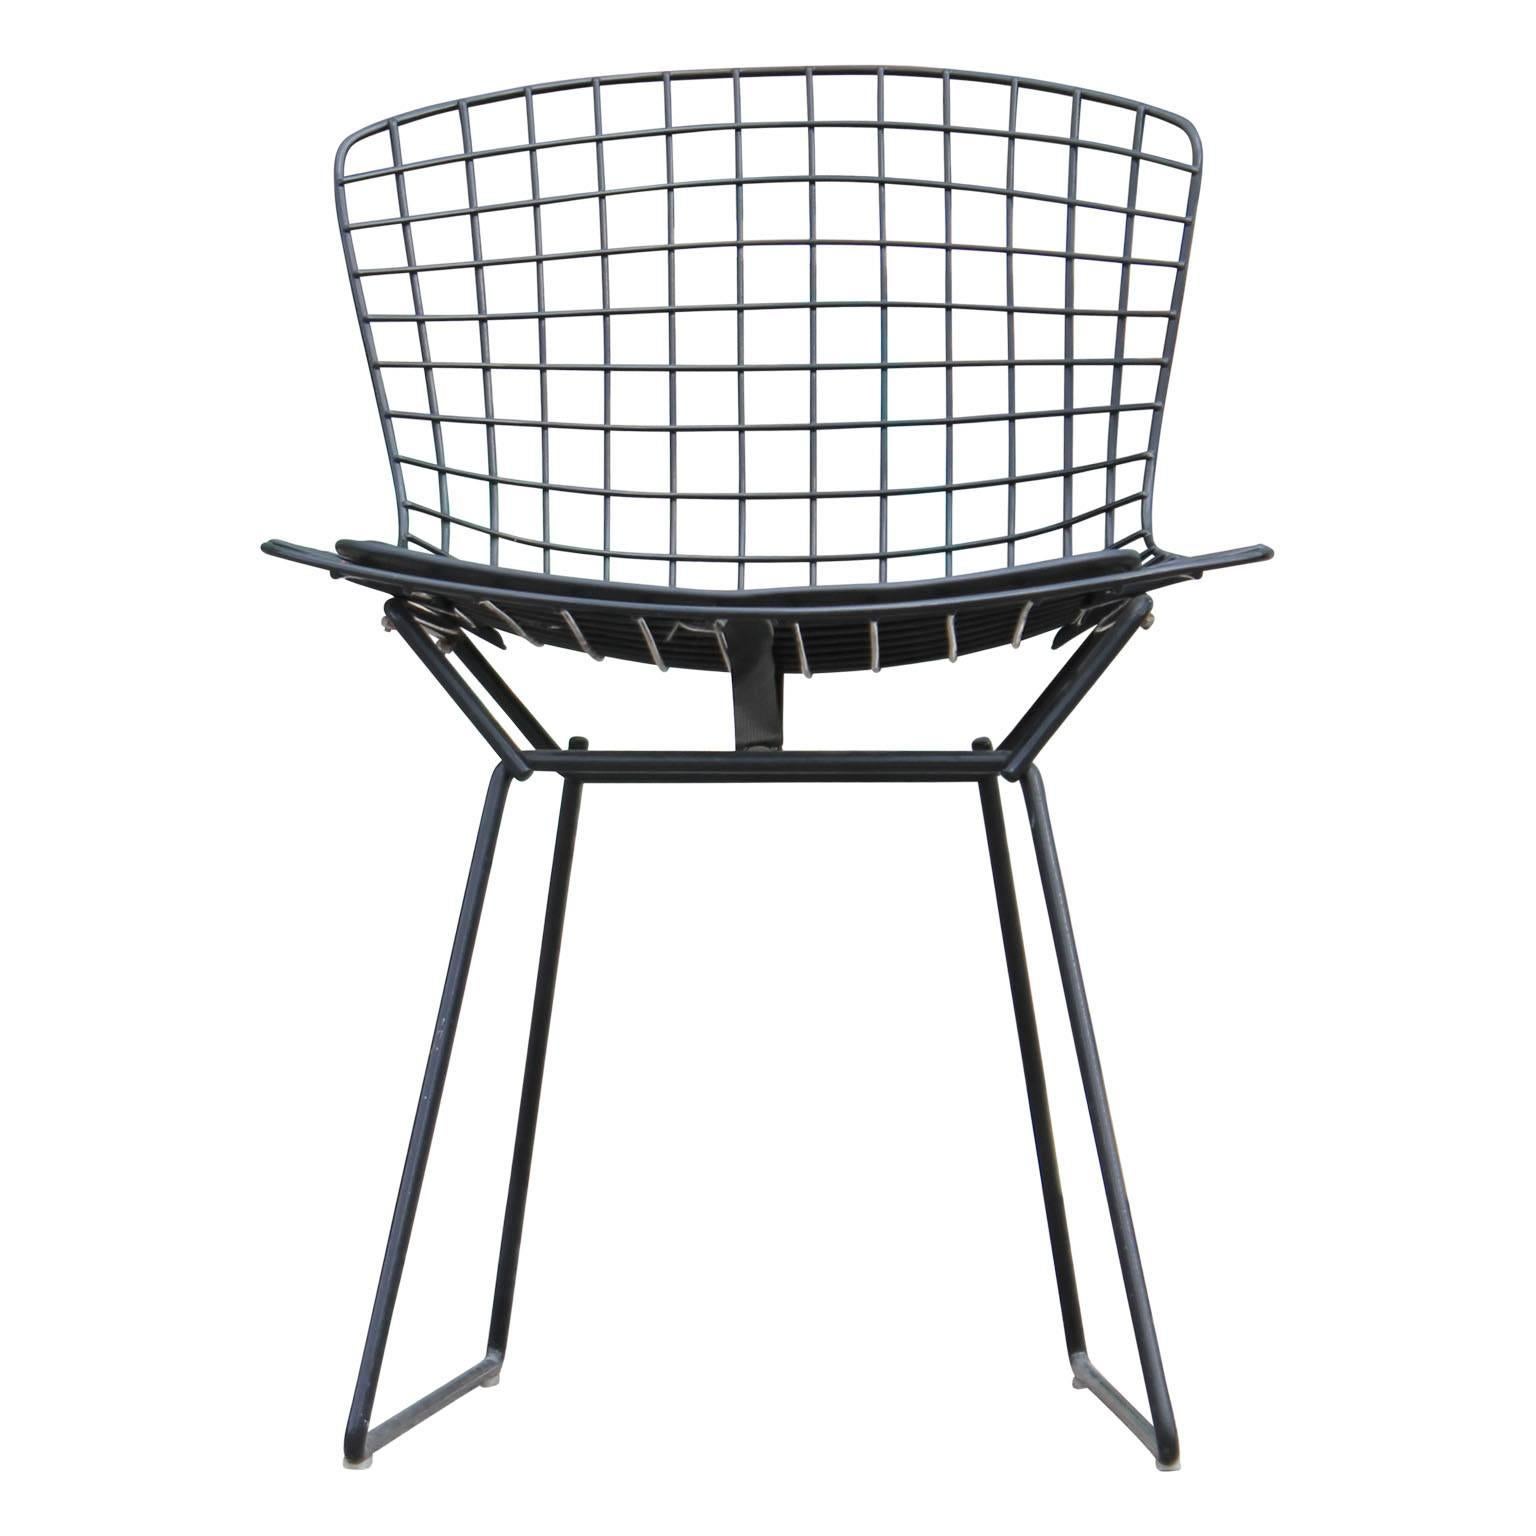 Set of four original black wire dining or side chairs by Harry Bertoia for Knoll. The fabric on the chairs is all original as well. Perfect for any mod, mid-mod or Hollywood Regency space.